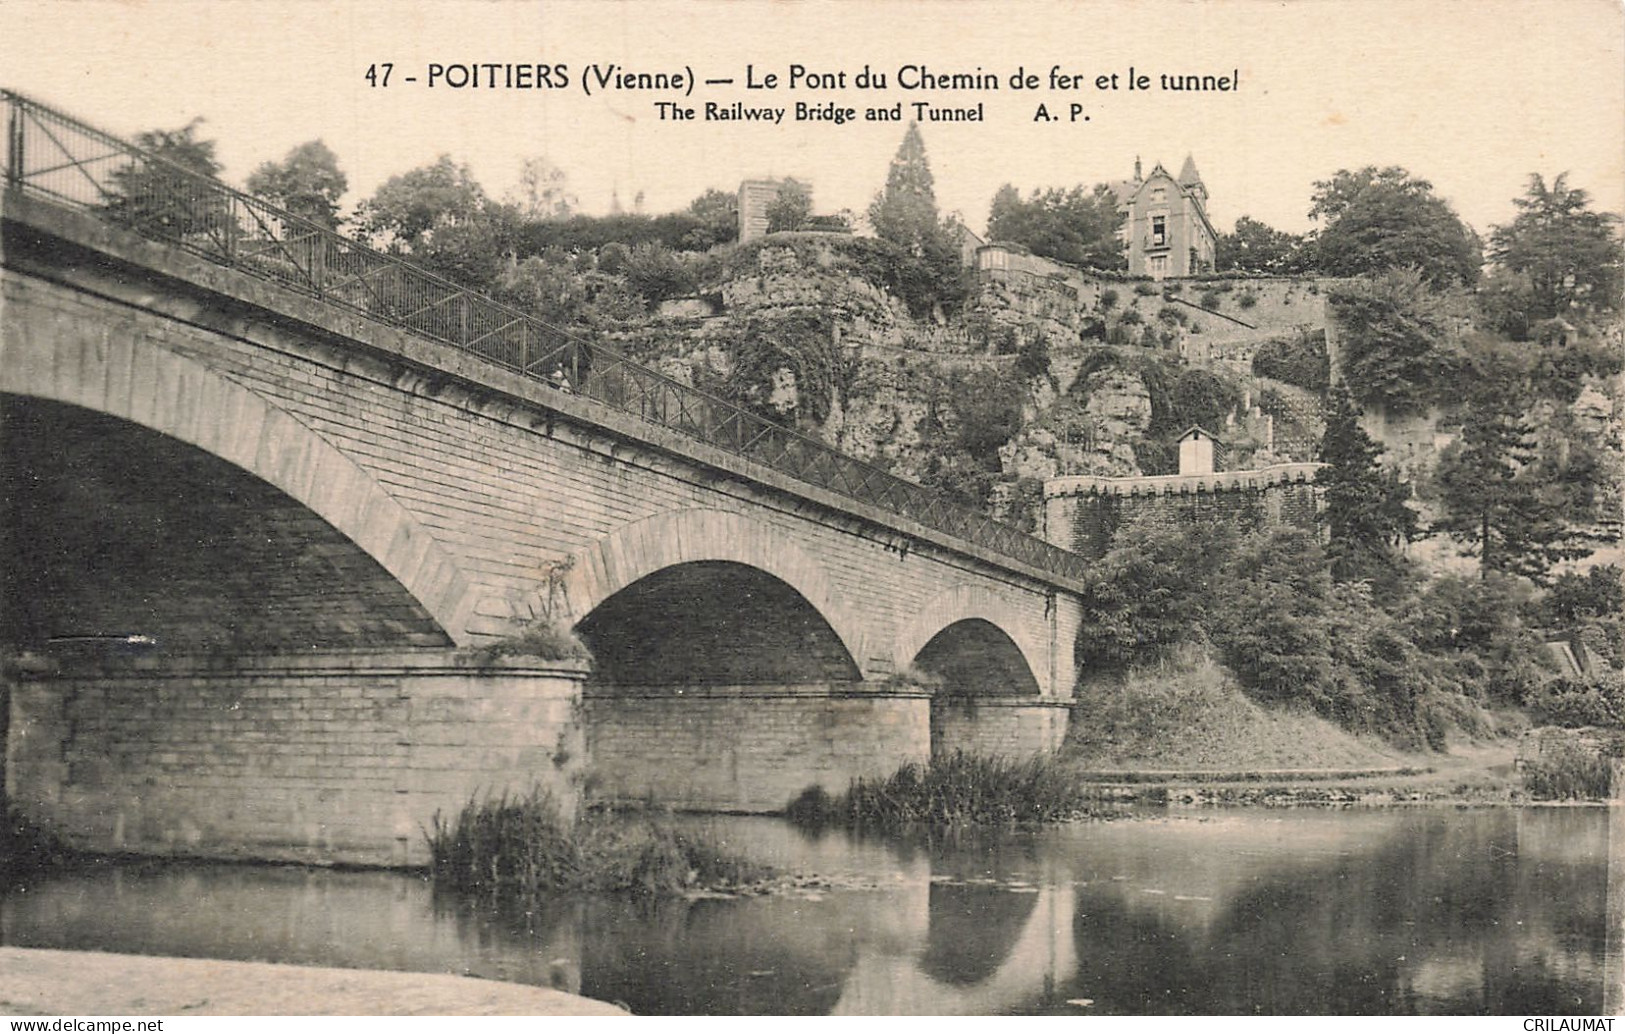 86-POITIERS-N°T5315-B/0385 - Poitiers